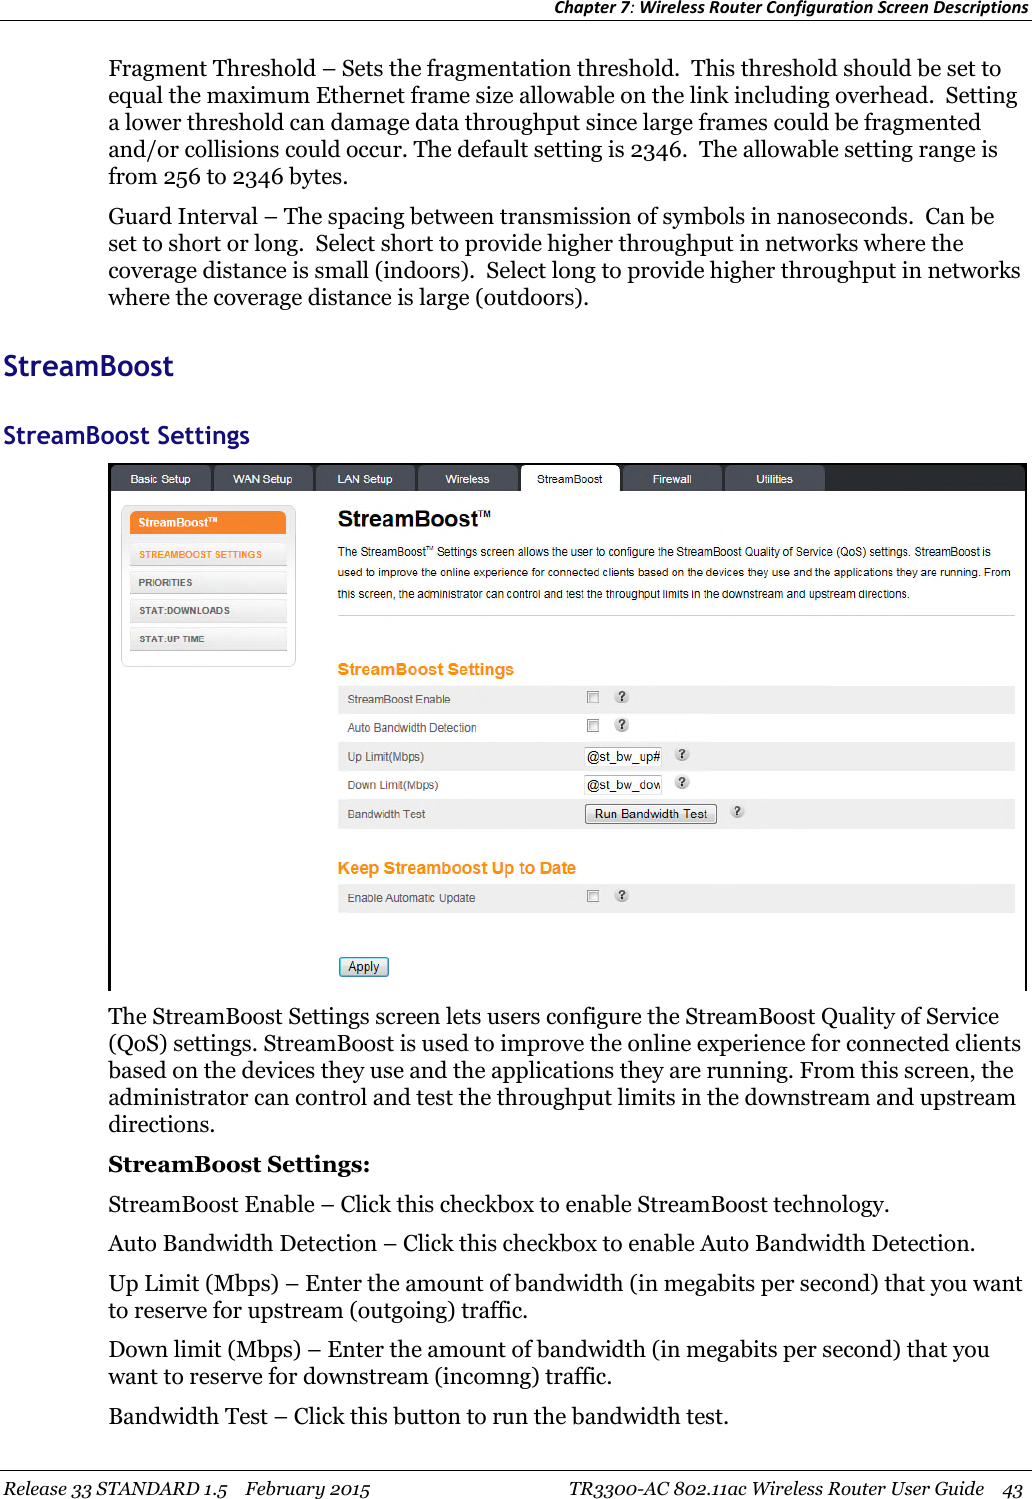 Chapter 7:Wireless Router Configuration Screen DescriptionsRelease 33 STANDARD 1.5 February 2015 TR3300-AC 802.11ac Wireless Router User Guide 43Fragment Threshold – Sets the fragmentation threshold. This threshold should be set toequal the maximum Ethernet frame size allowable on the link including overhead. Settinga lower threshold can damage data throughput since large frames could be fragmentedand/or collisions could occur. The default setting is 2346. The allowable setting range isfrom 256 to 2346 bytes.Guard Interval – The spacing between transmission of symbols in nanoseconds. Can beset to short or long. Select short to provide higher throughput in networks where thecoverage distance is small (indoors). Select long to provide higher throughput in networkswhere the coverage distance is large (outdoors).StreamBoostStreamBoost SettingsThe StreamBoost Settings screen lets users configure the StreamBoost Quality of Service(QoS) settings. StreamBoost is used to improve the online experience for connected clientsbased on the devices they use and the applications they are running. From this screen, theadministrator can control and test the throughput limits in the downstream and upstreamdirections.StreamBoost Settings:StreamBoost Enable – Click this checkbox to enable StreamBoost technology.Auto Bandwidth Detection – Click this checkbox to enable Auto Bandwidth Detection.Up Limit (Mbps) – Enter the amount of bandwidth (in megabits per second) that you wantto reserve for upstream (outgoing) traffic.Down limit (Mbps) – Enter the amount of bandwidth (in megabits per second) that youwant to reserve for downstream (incomng) traffic.Bandwidth Test – Click this button to run the bandwidth test.